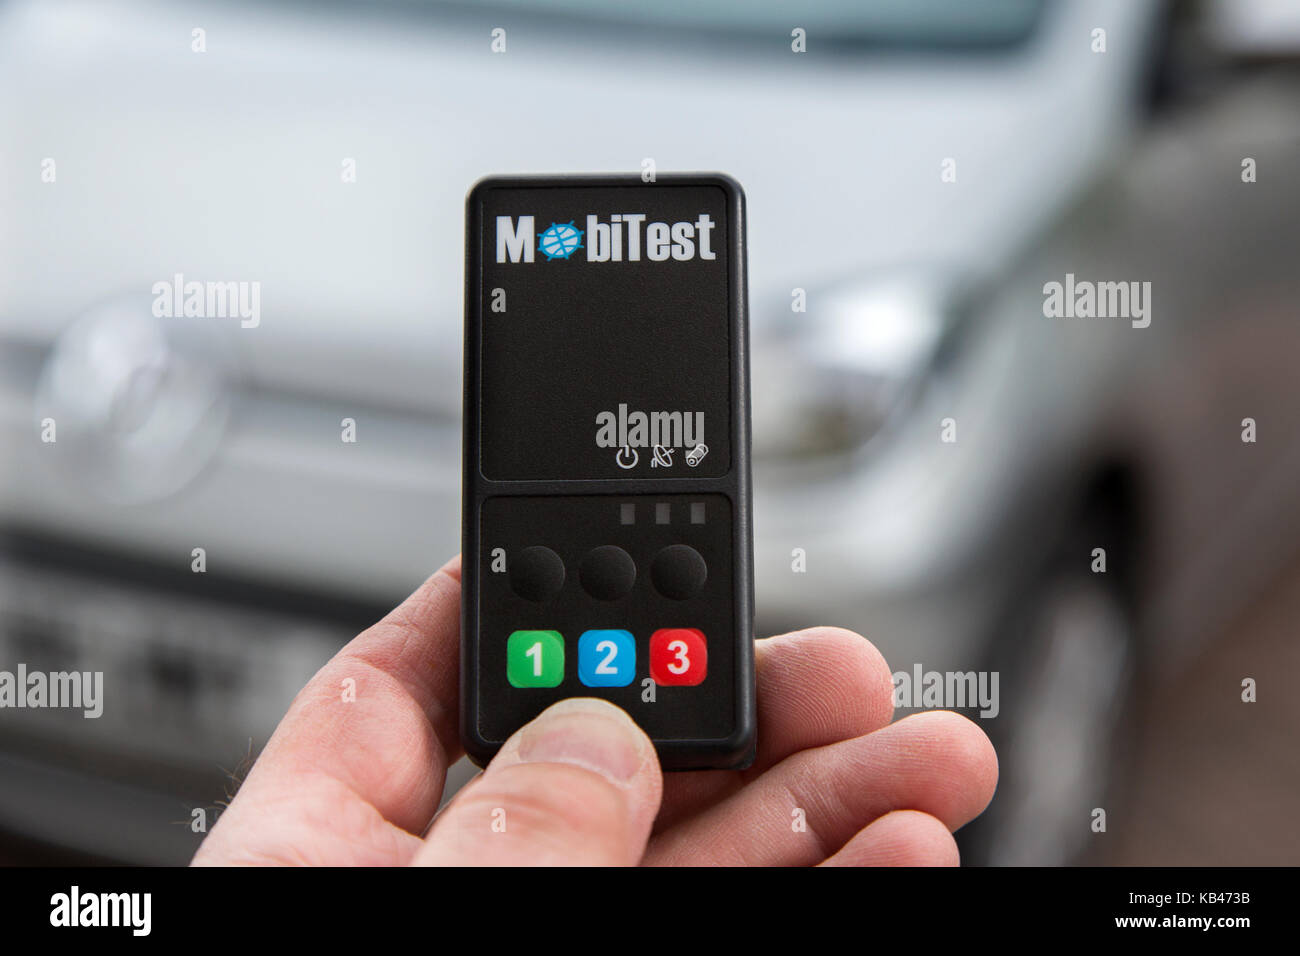 MobiTest survey device, a Multi Sensory Tracking (MST) meter monitoring travel movements and characteristics Stock Photo